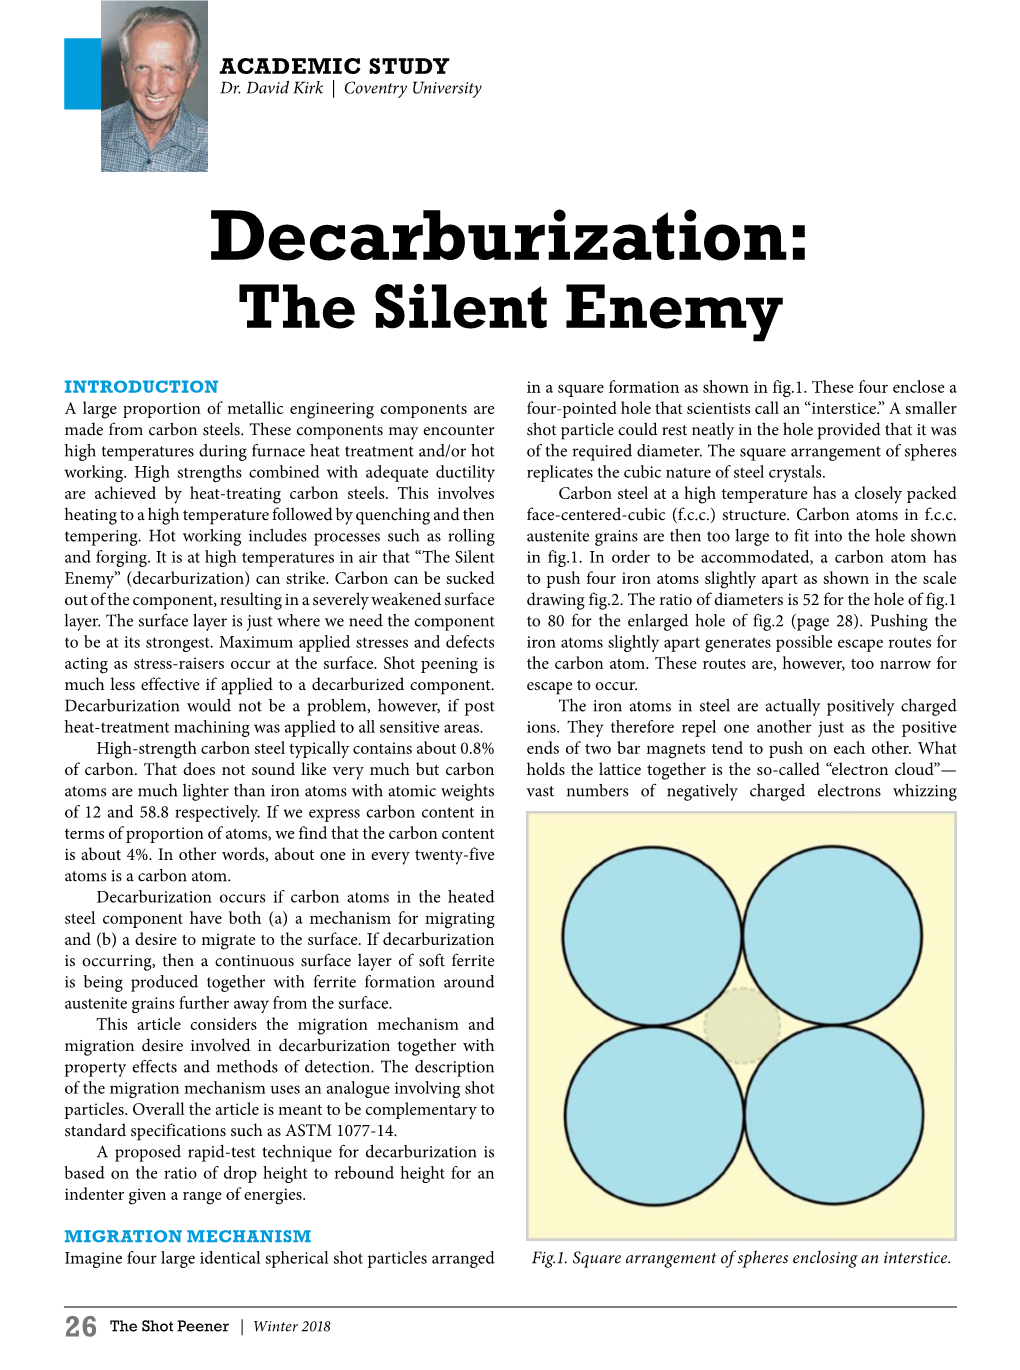 Decarburization: the Silent Enemy